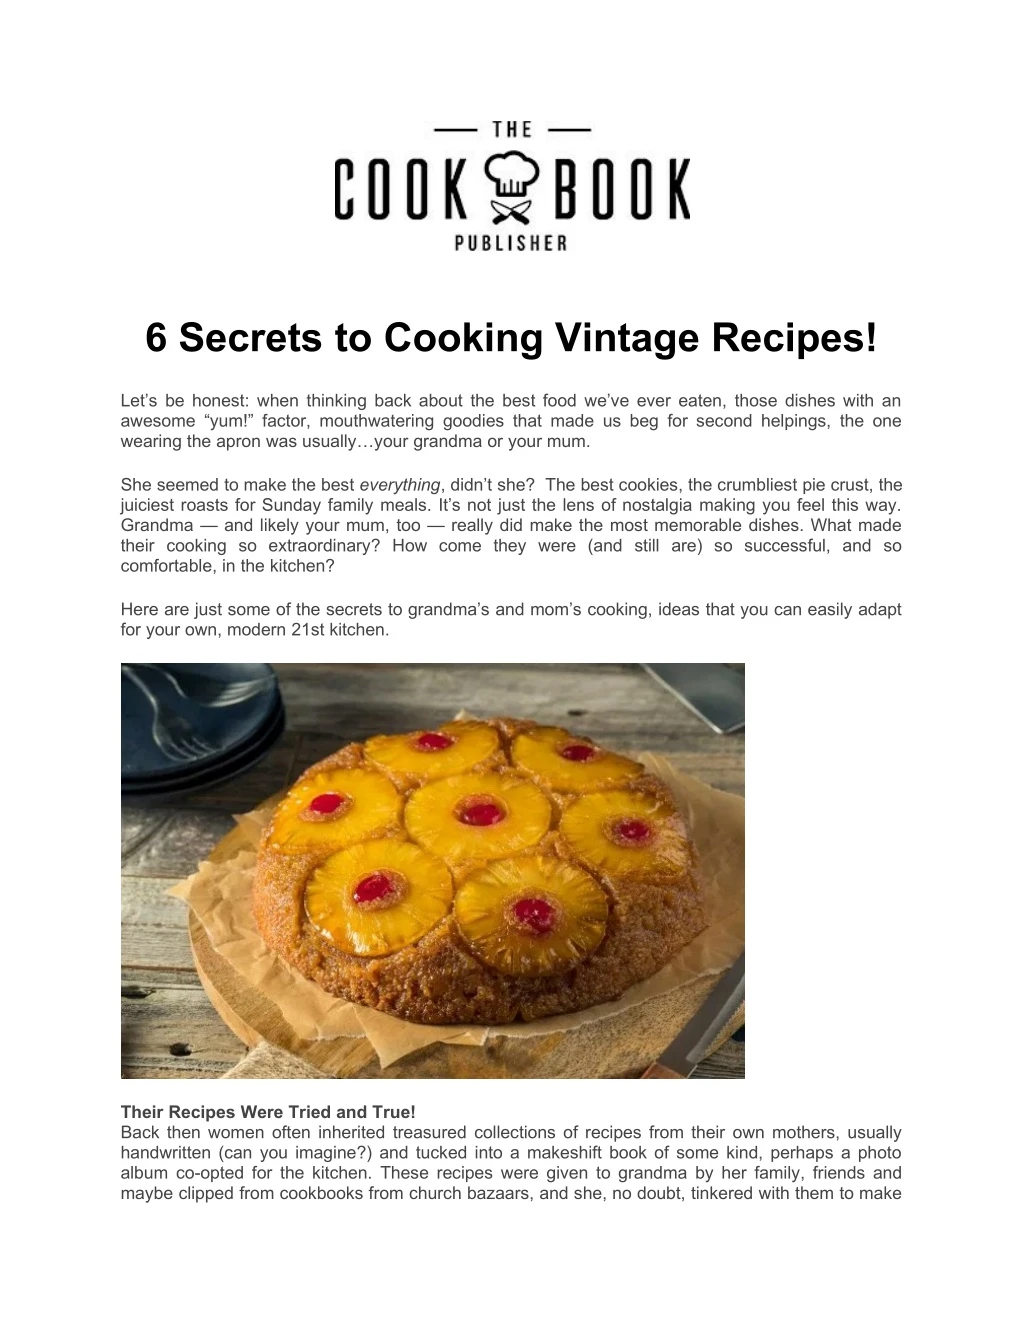 6 secrets to cooking vintage recipes